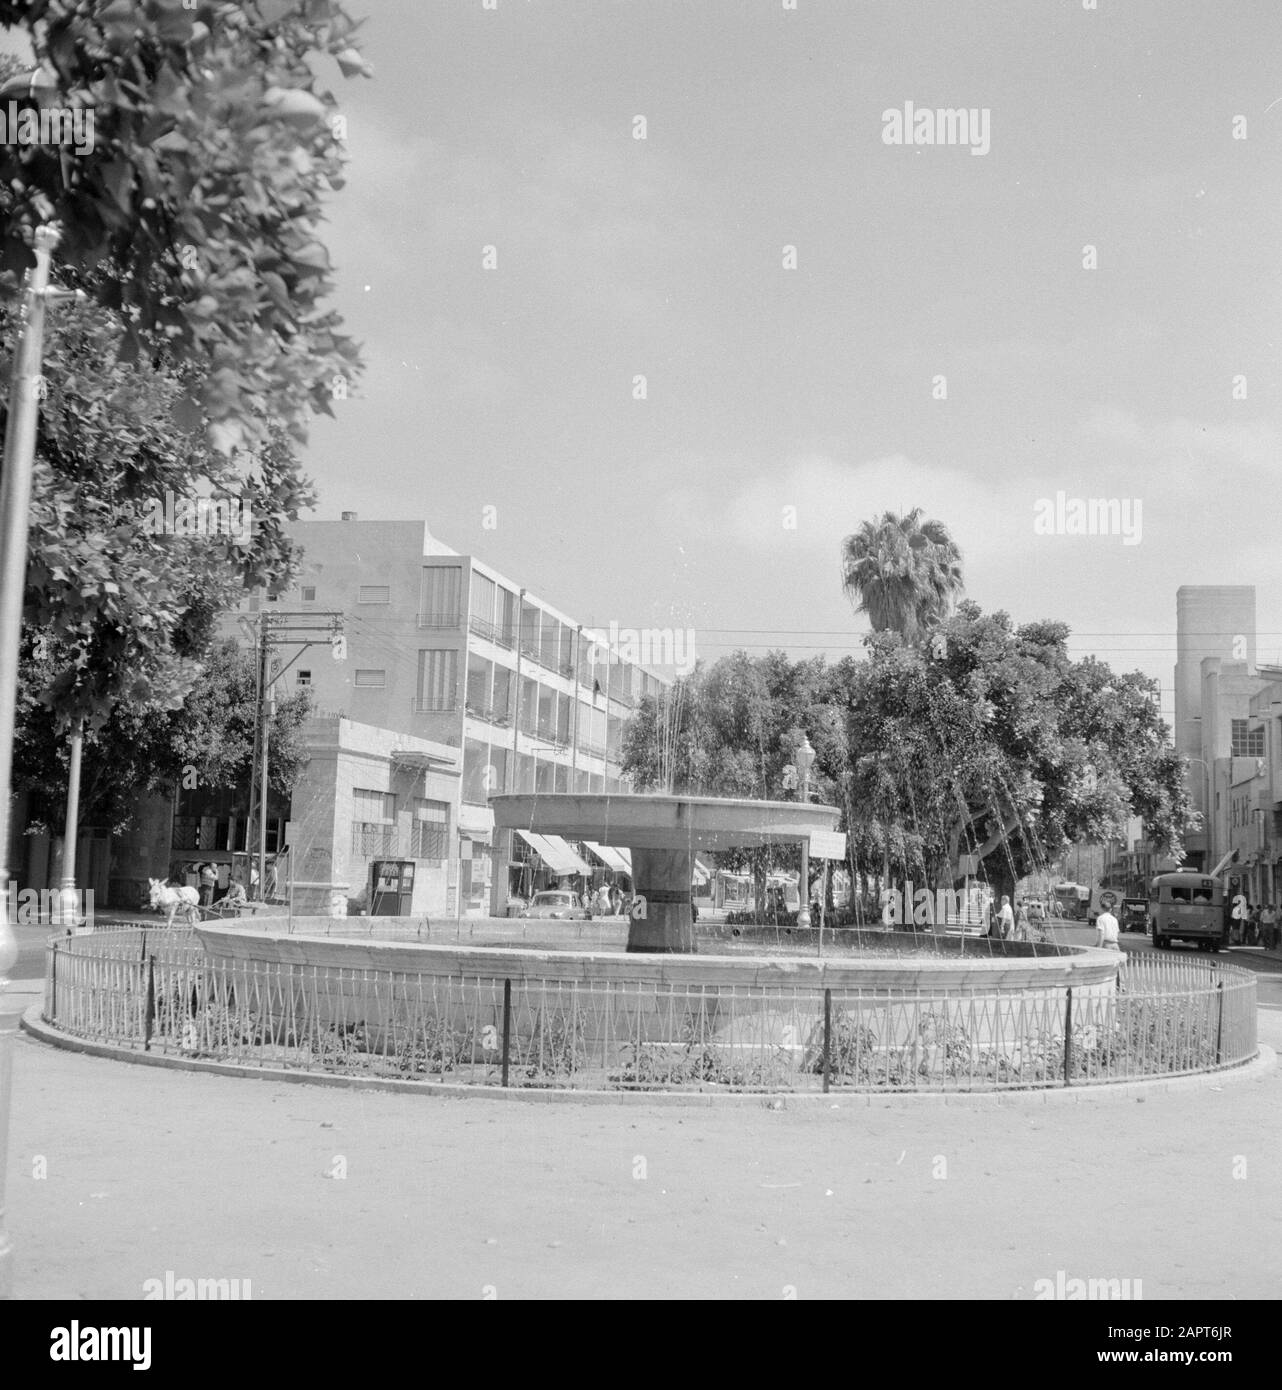 Israel: Jaffa (Tel Aviv)  Fountain on square with buildings and trees in the background Annotation: Jaffa is now a city district of Tel Aviv Date: undated Location: Israel, Jaffa, Tel Aviv Keywords : trees, fountains, squares, street images Stock Photo